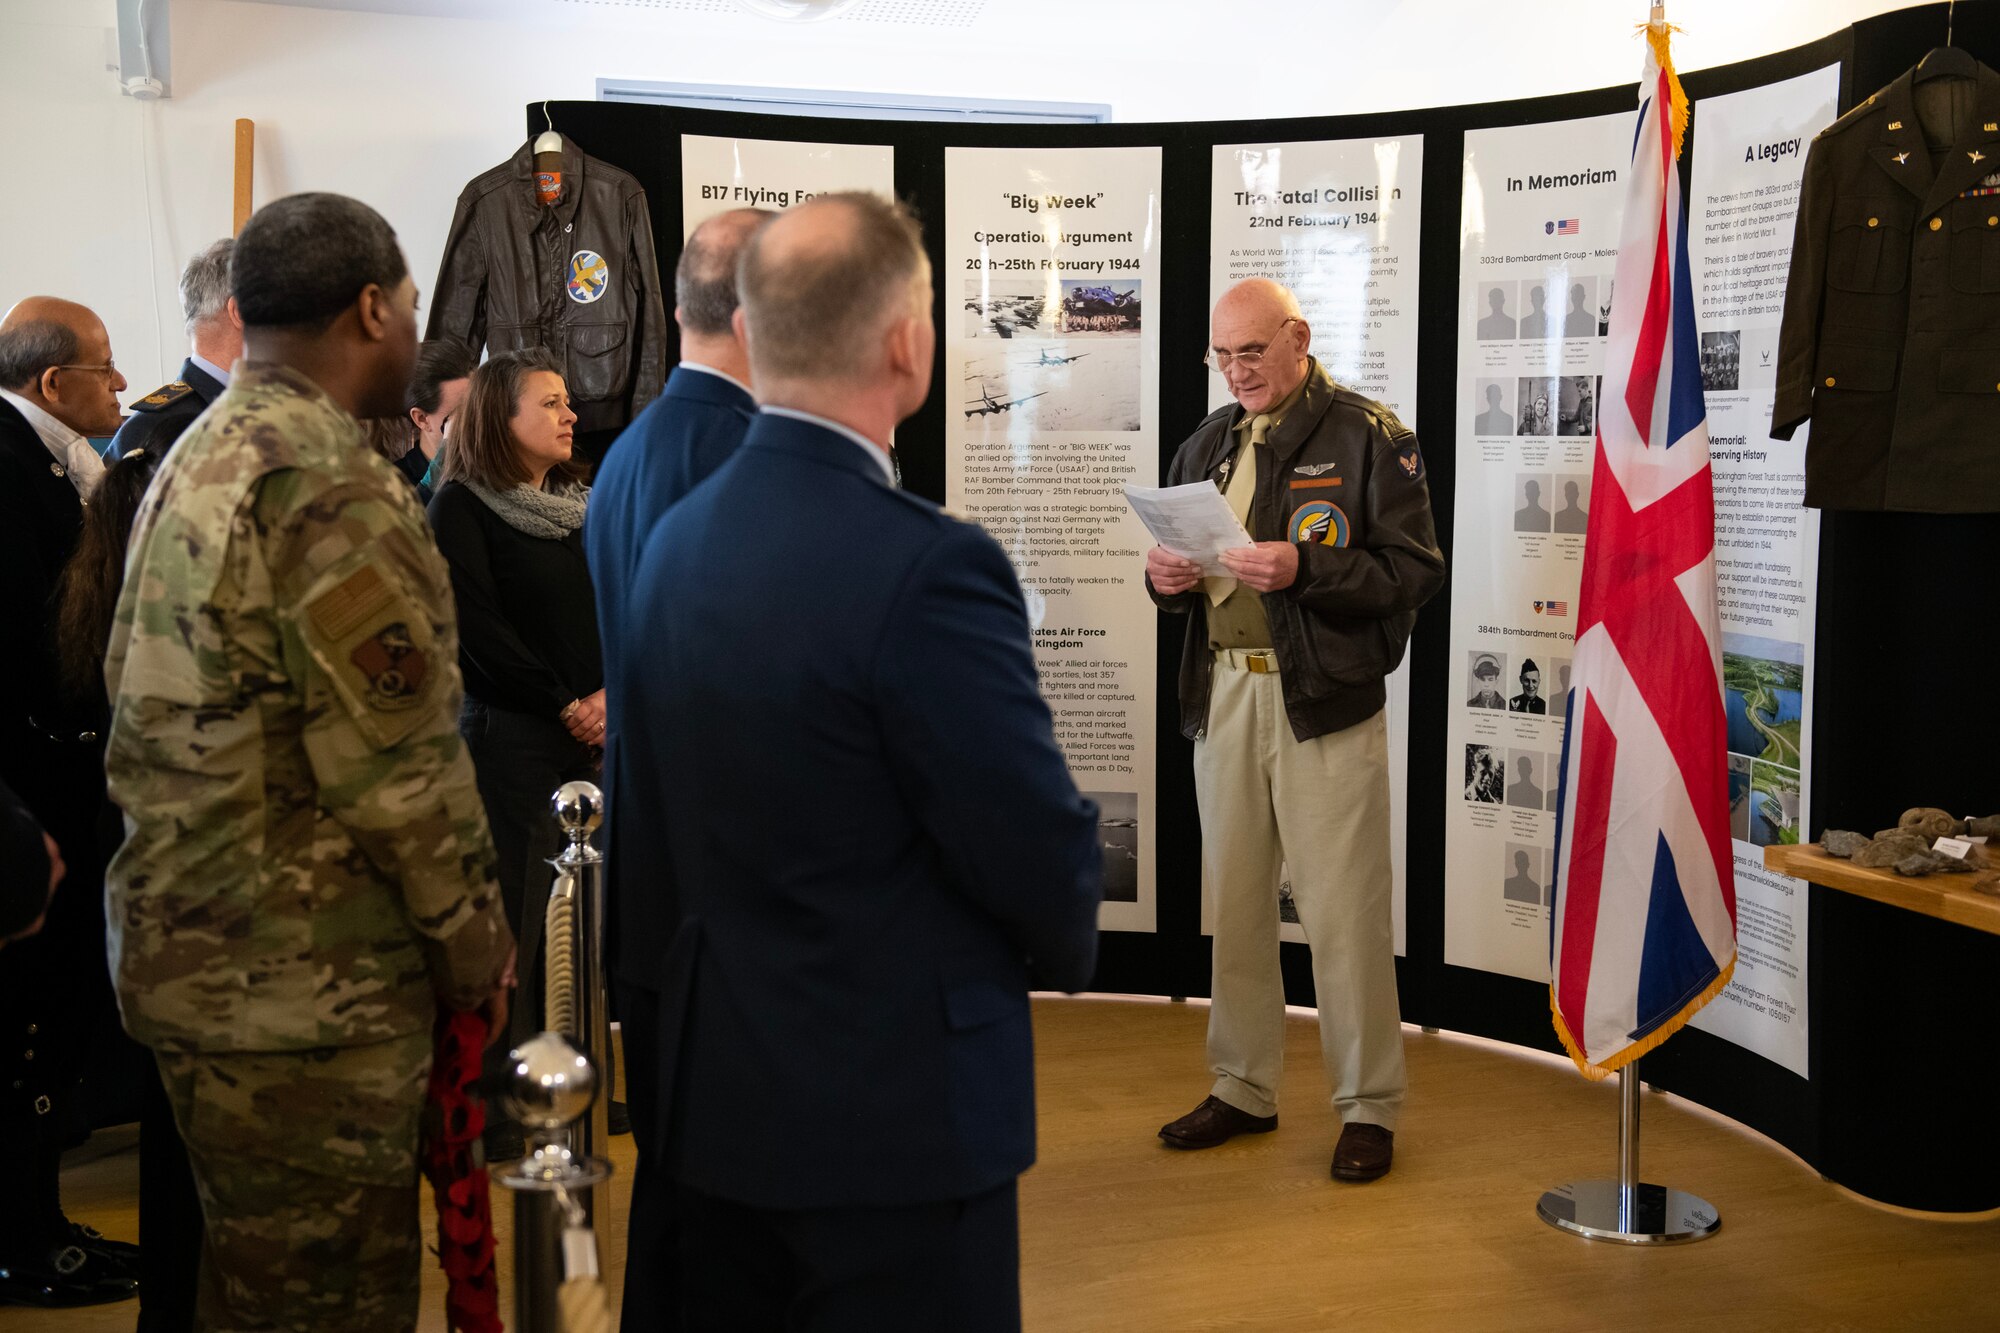 Brian Francis reads a poem during a Ceremony of Remembrance at Stanwick Lakes, England, Feb. 22, 2024. U.S. and U.K. leaders gathered to honor 17 Airmen who died in a midair collision on Feb. 22, 1944, involving B-17 Flying Fortresses from the 303rd Bombardment Group at RAF Molesworth and the 384th Bombardment Group at RAF Grafton Underwood. The Airmen were part of Operation Argument, or "The Big Week," targeting enemy industrial sites and aircraft facilities in Central Europe to secure Allied air superiority for the upcoming landings in France in June 1944. (U.S. Air Force photo by Staff Sgt. Jennifer Zima)